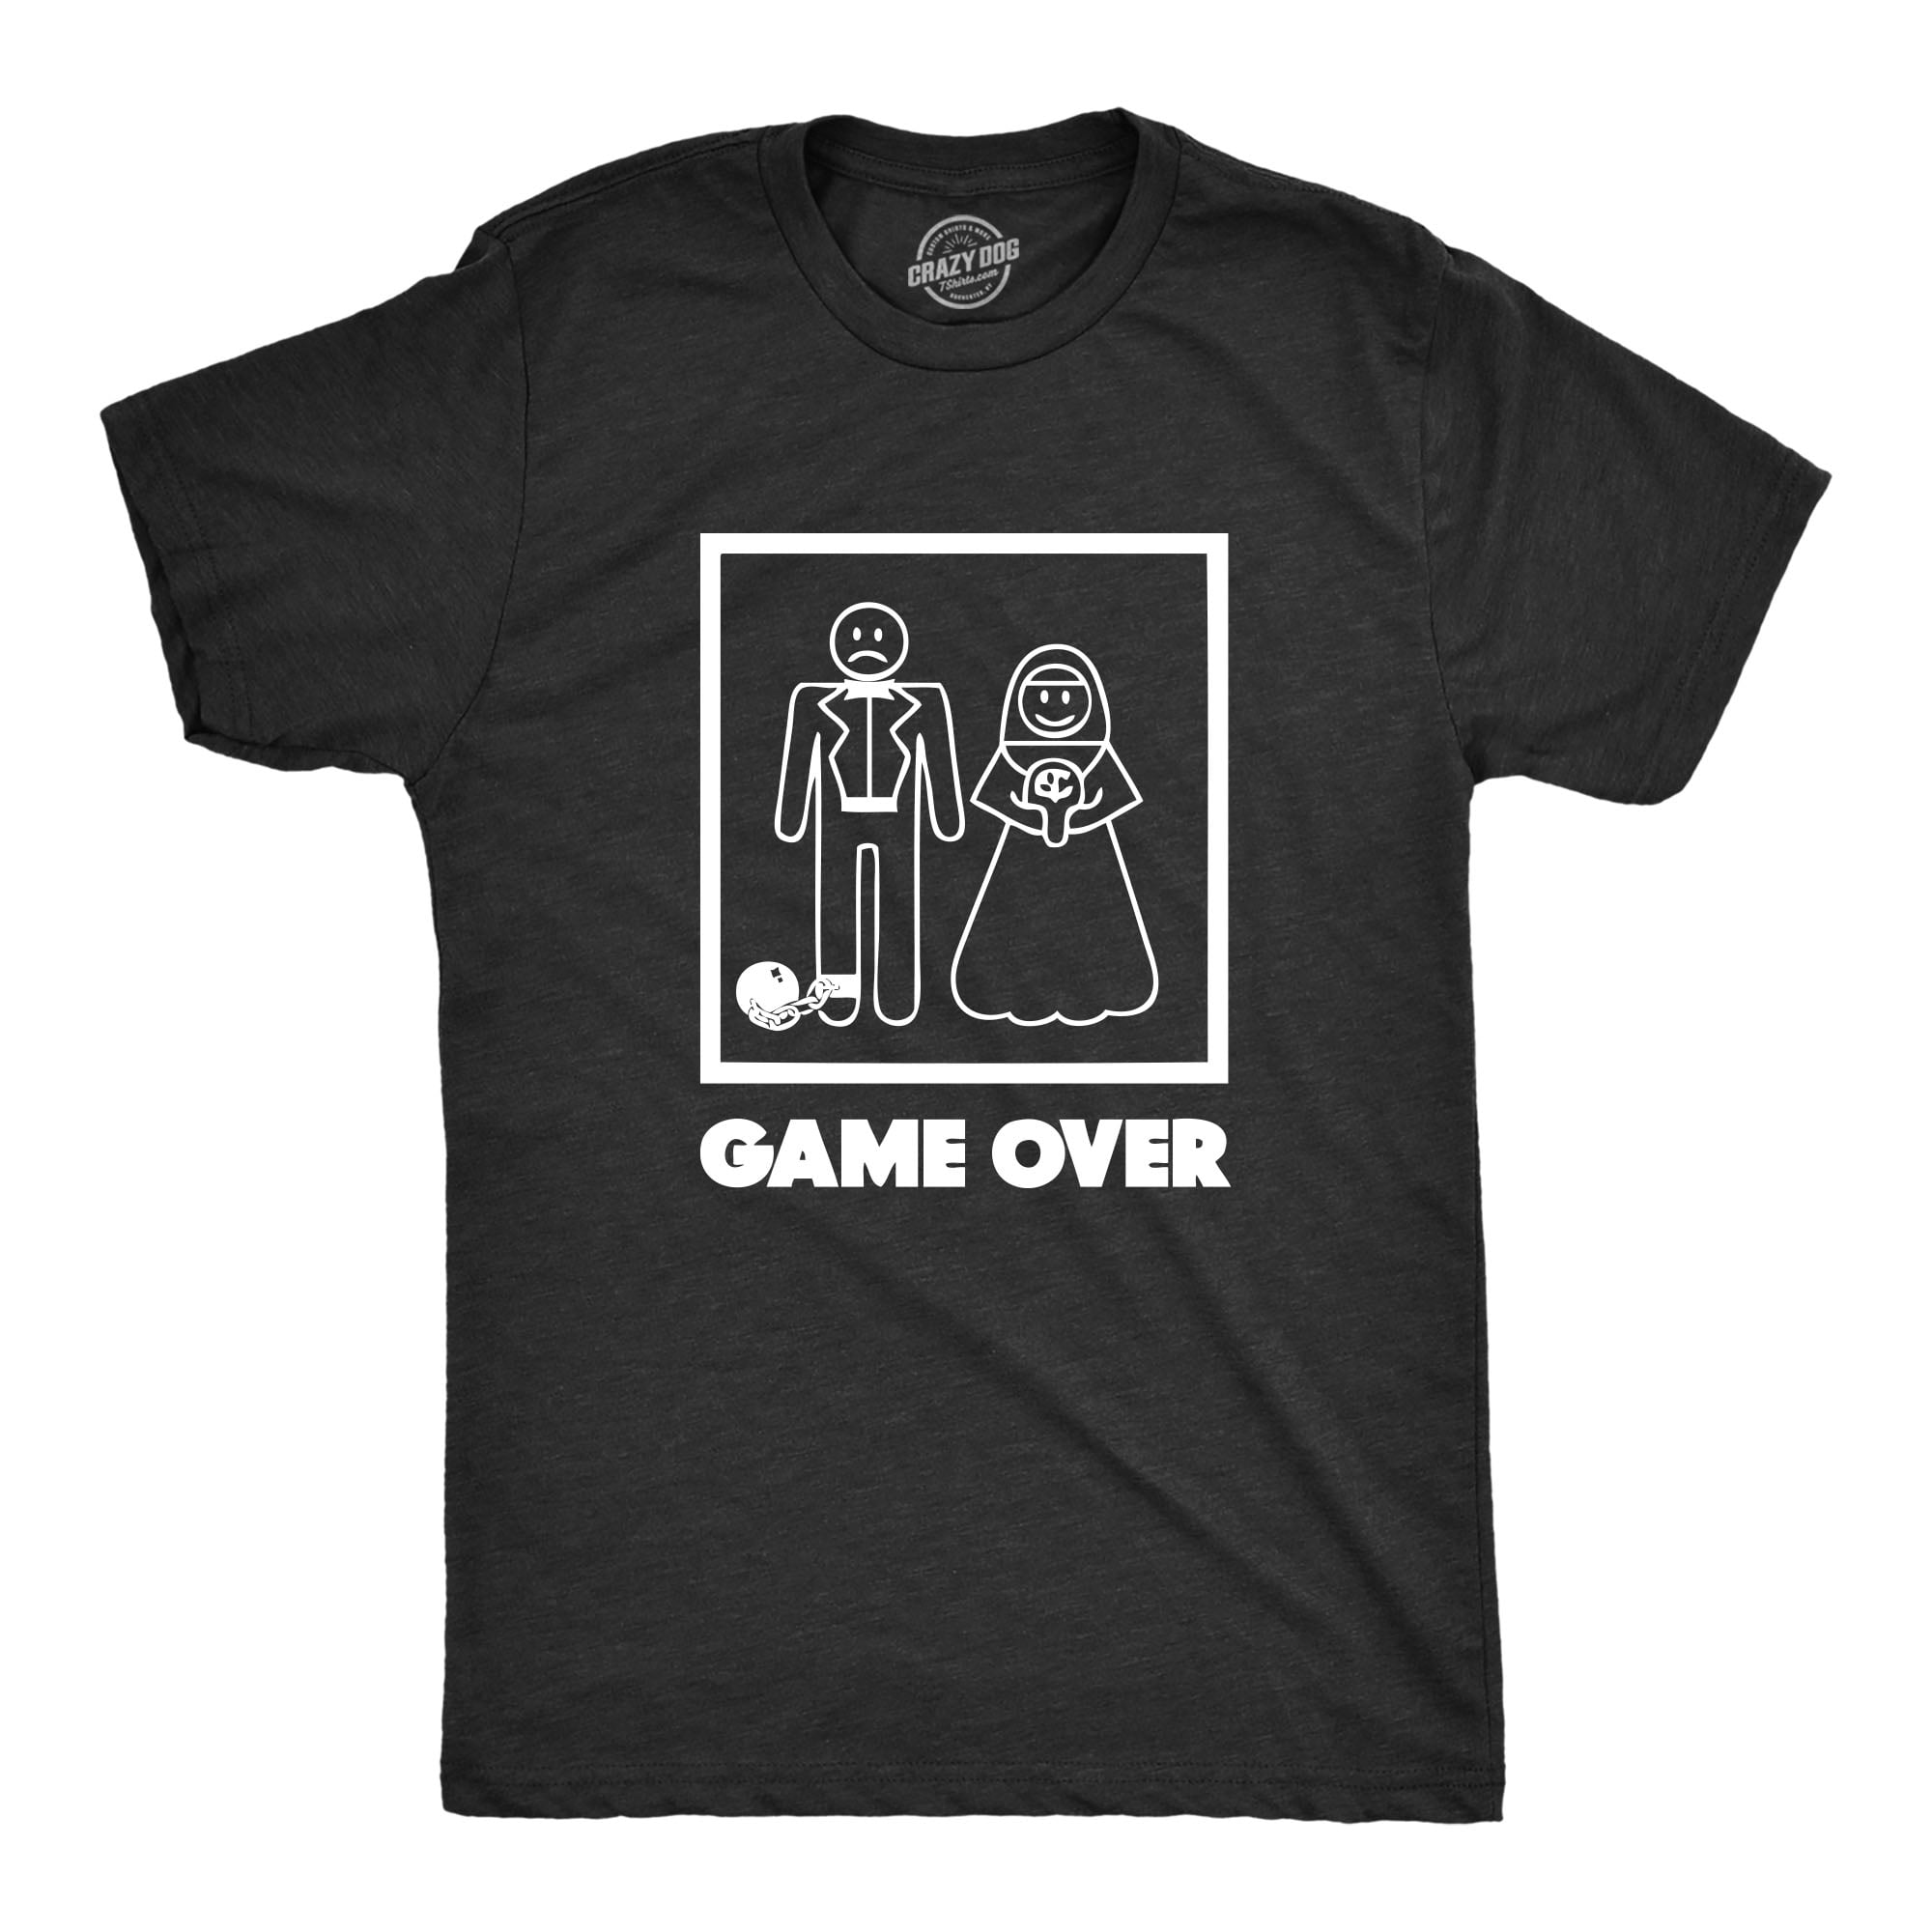 Mens Game Over T shirt Funny Wedding T shirts Humor Bachelor Party Novelty Tees (Black) - S Graphic - Walmart.com